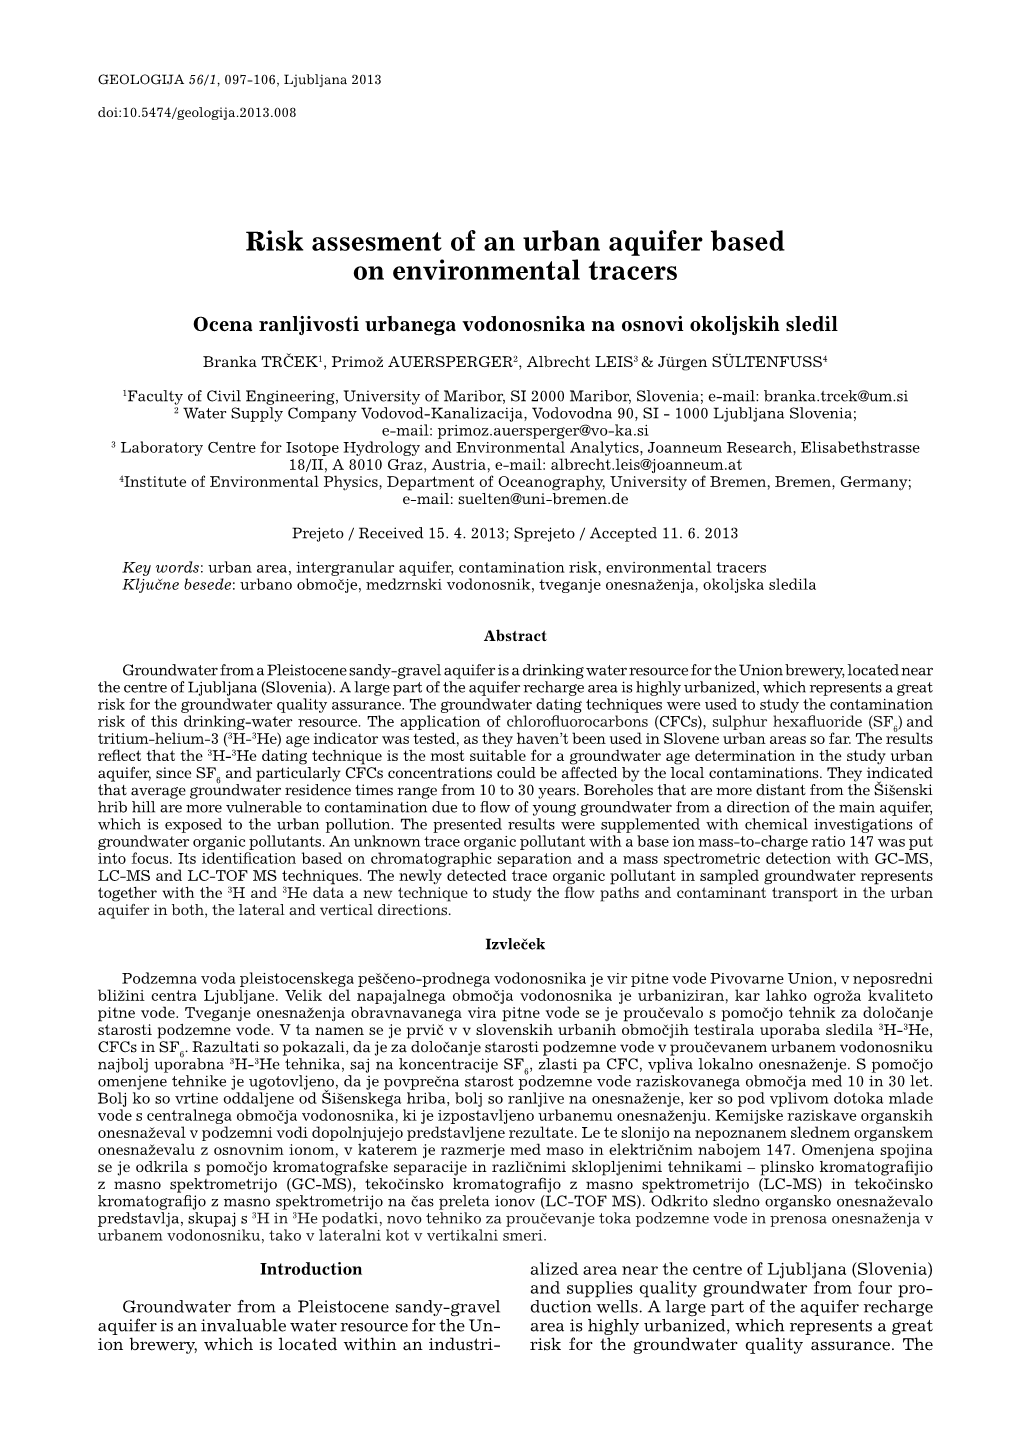 Risk Assesment of an Urban Aquifer Based on Environmental Tracers